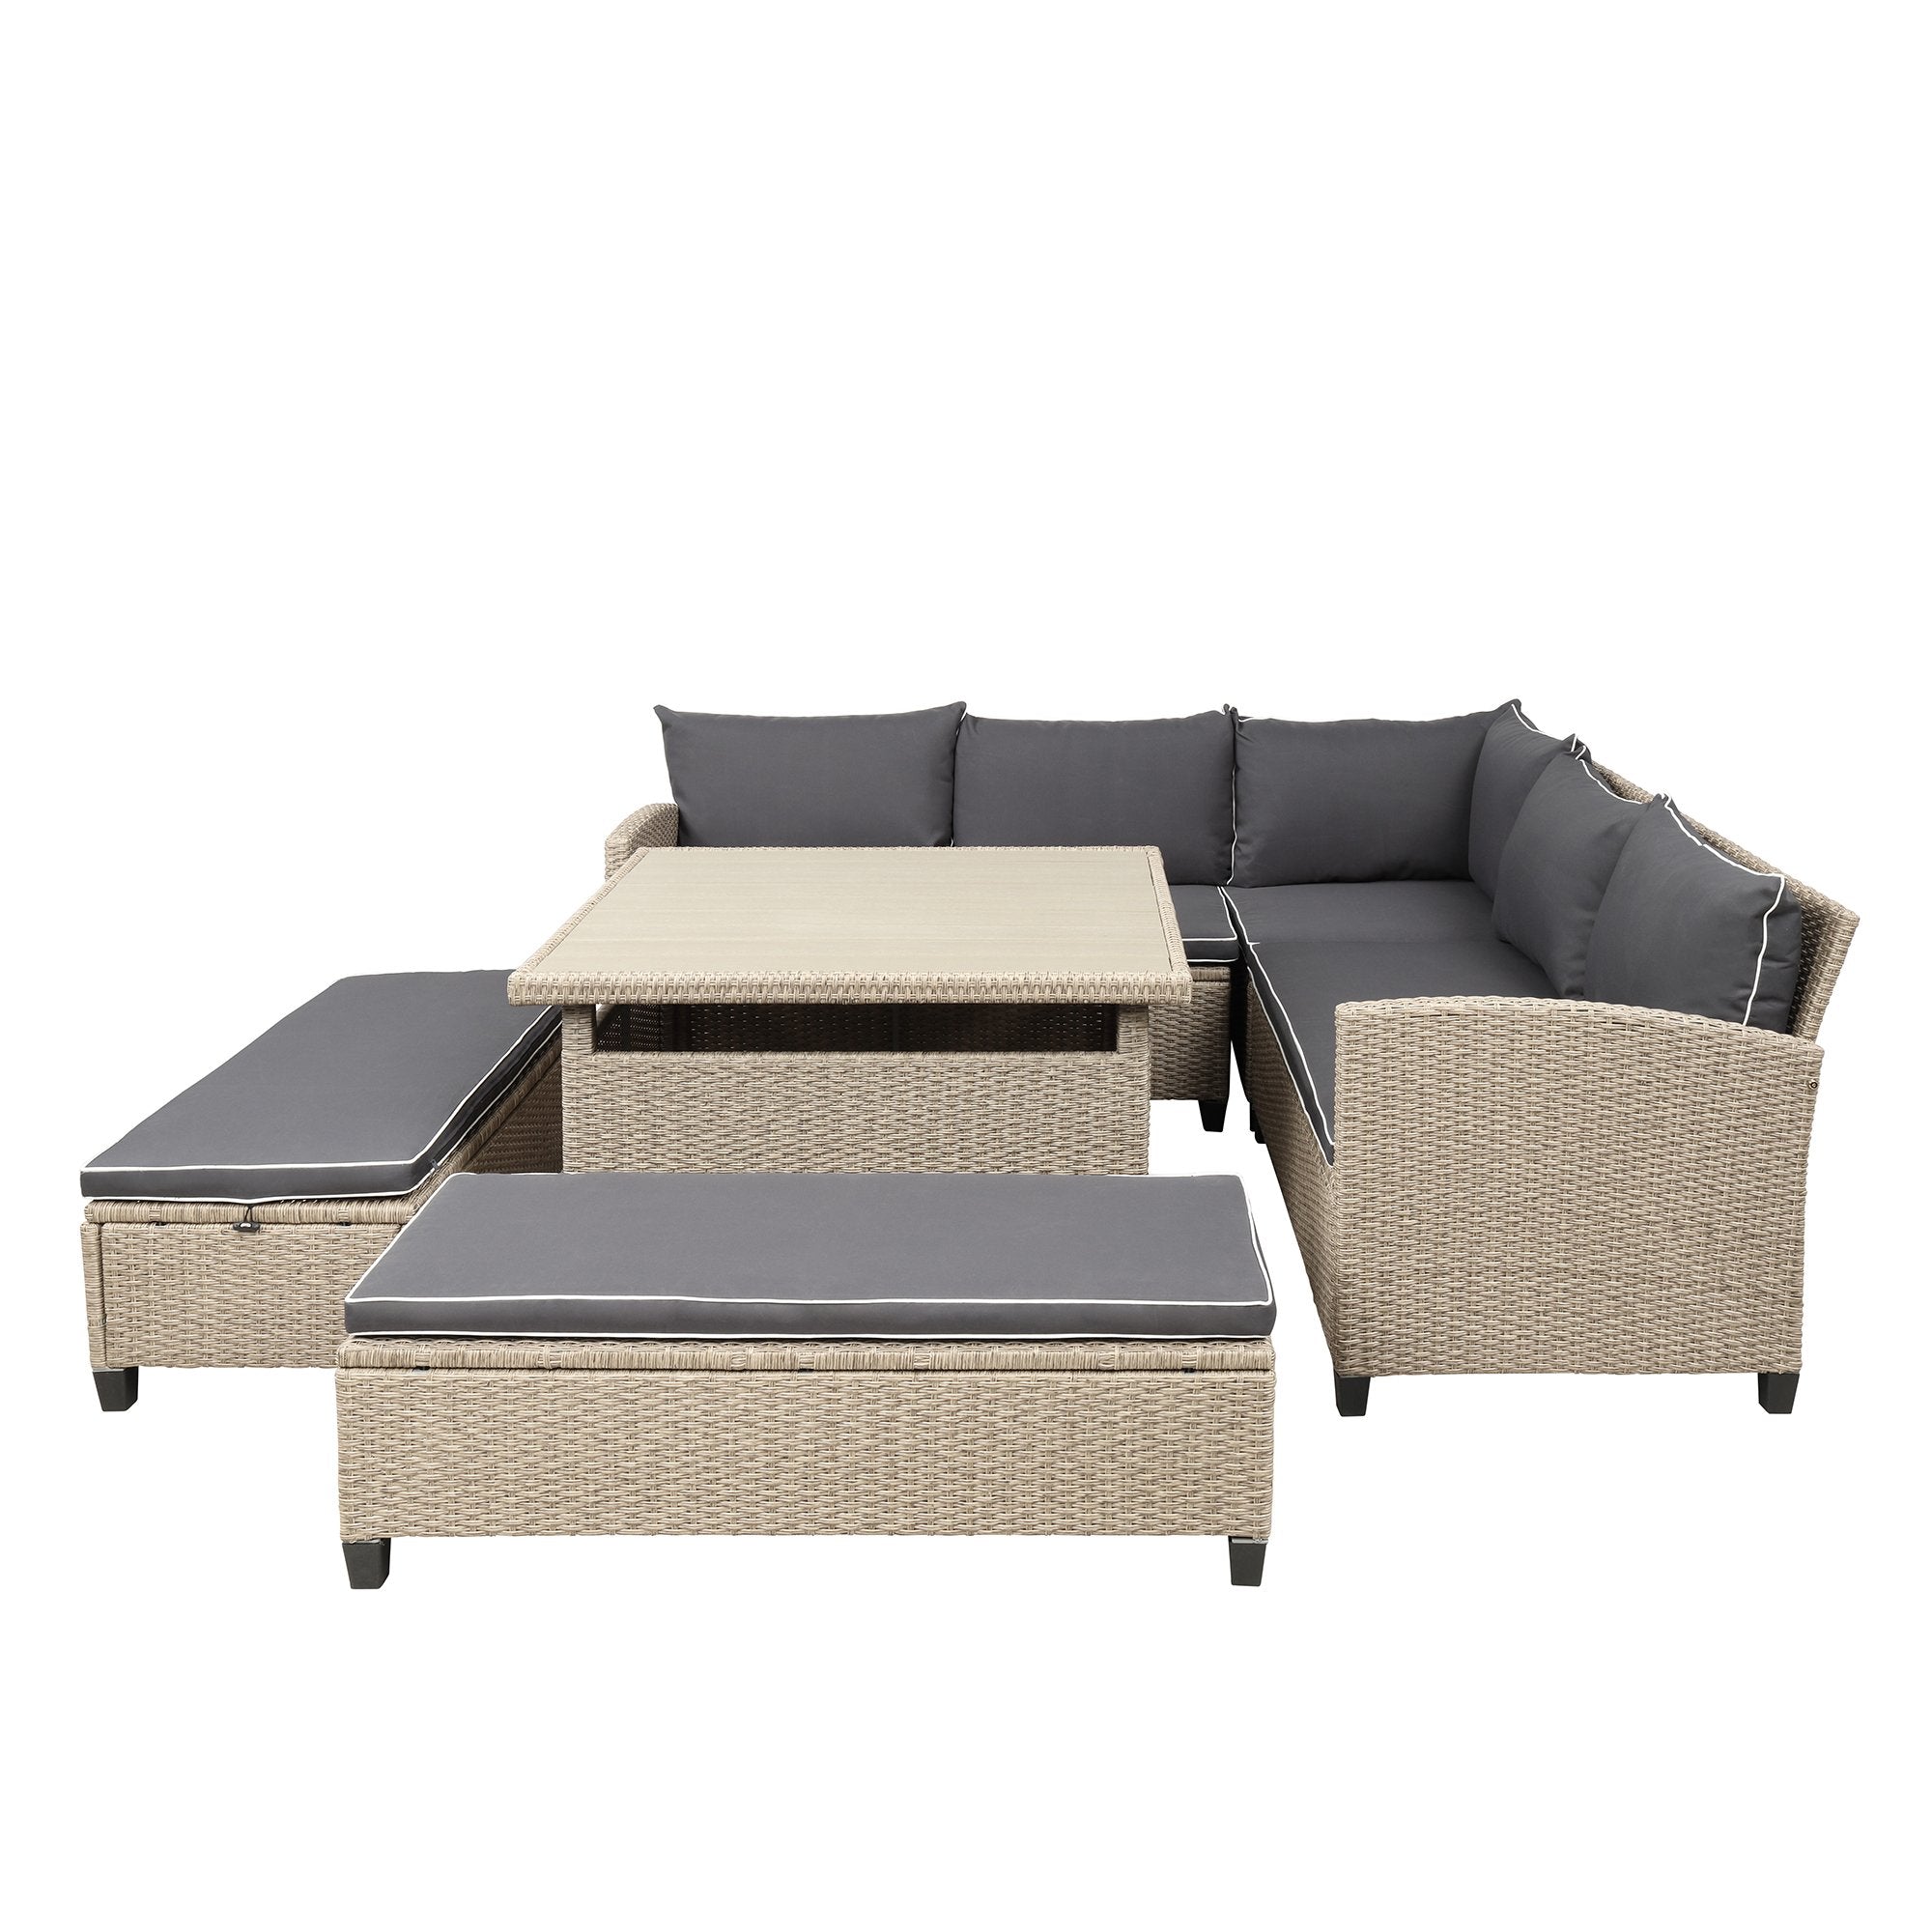 6-Piece Patio Furniture Set Outdoor Wicker Rattan Sectional Sofa with Table and Benches for Backyard, Garden, Poolside-Boyel Living